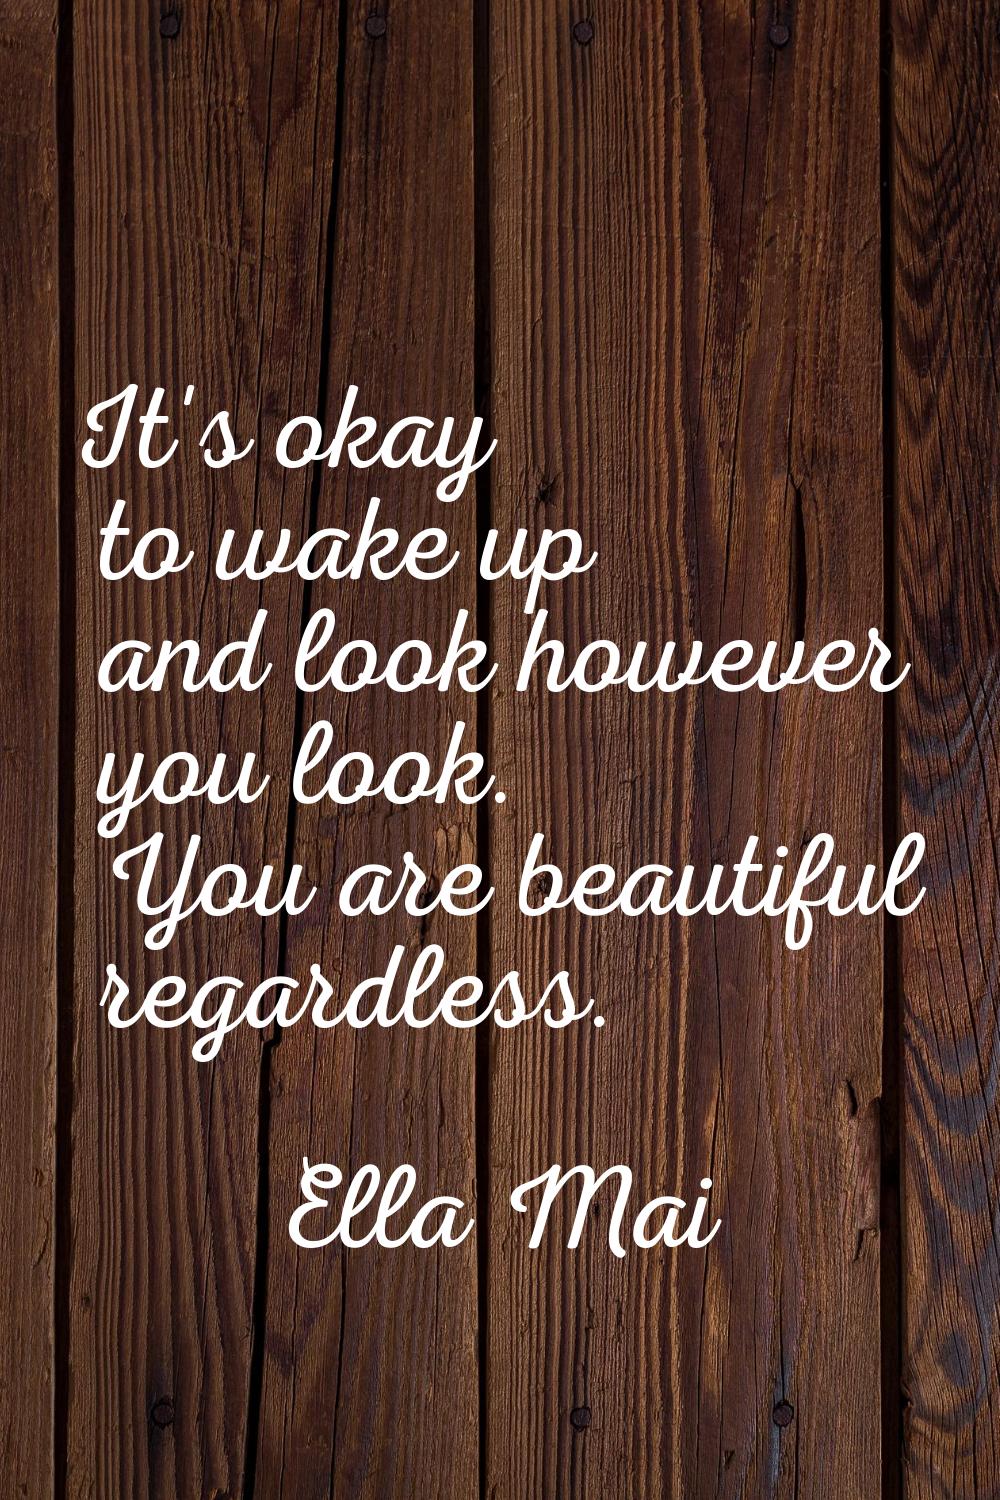 It's okay to wake up and look however you look. You are beautiful regardless.